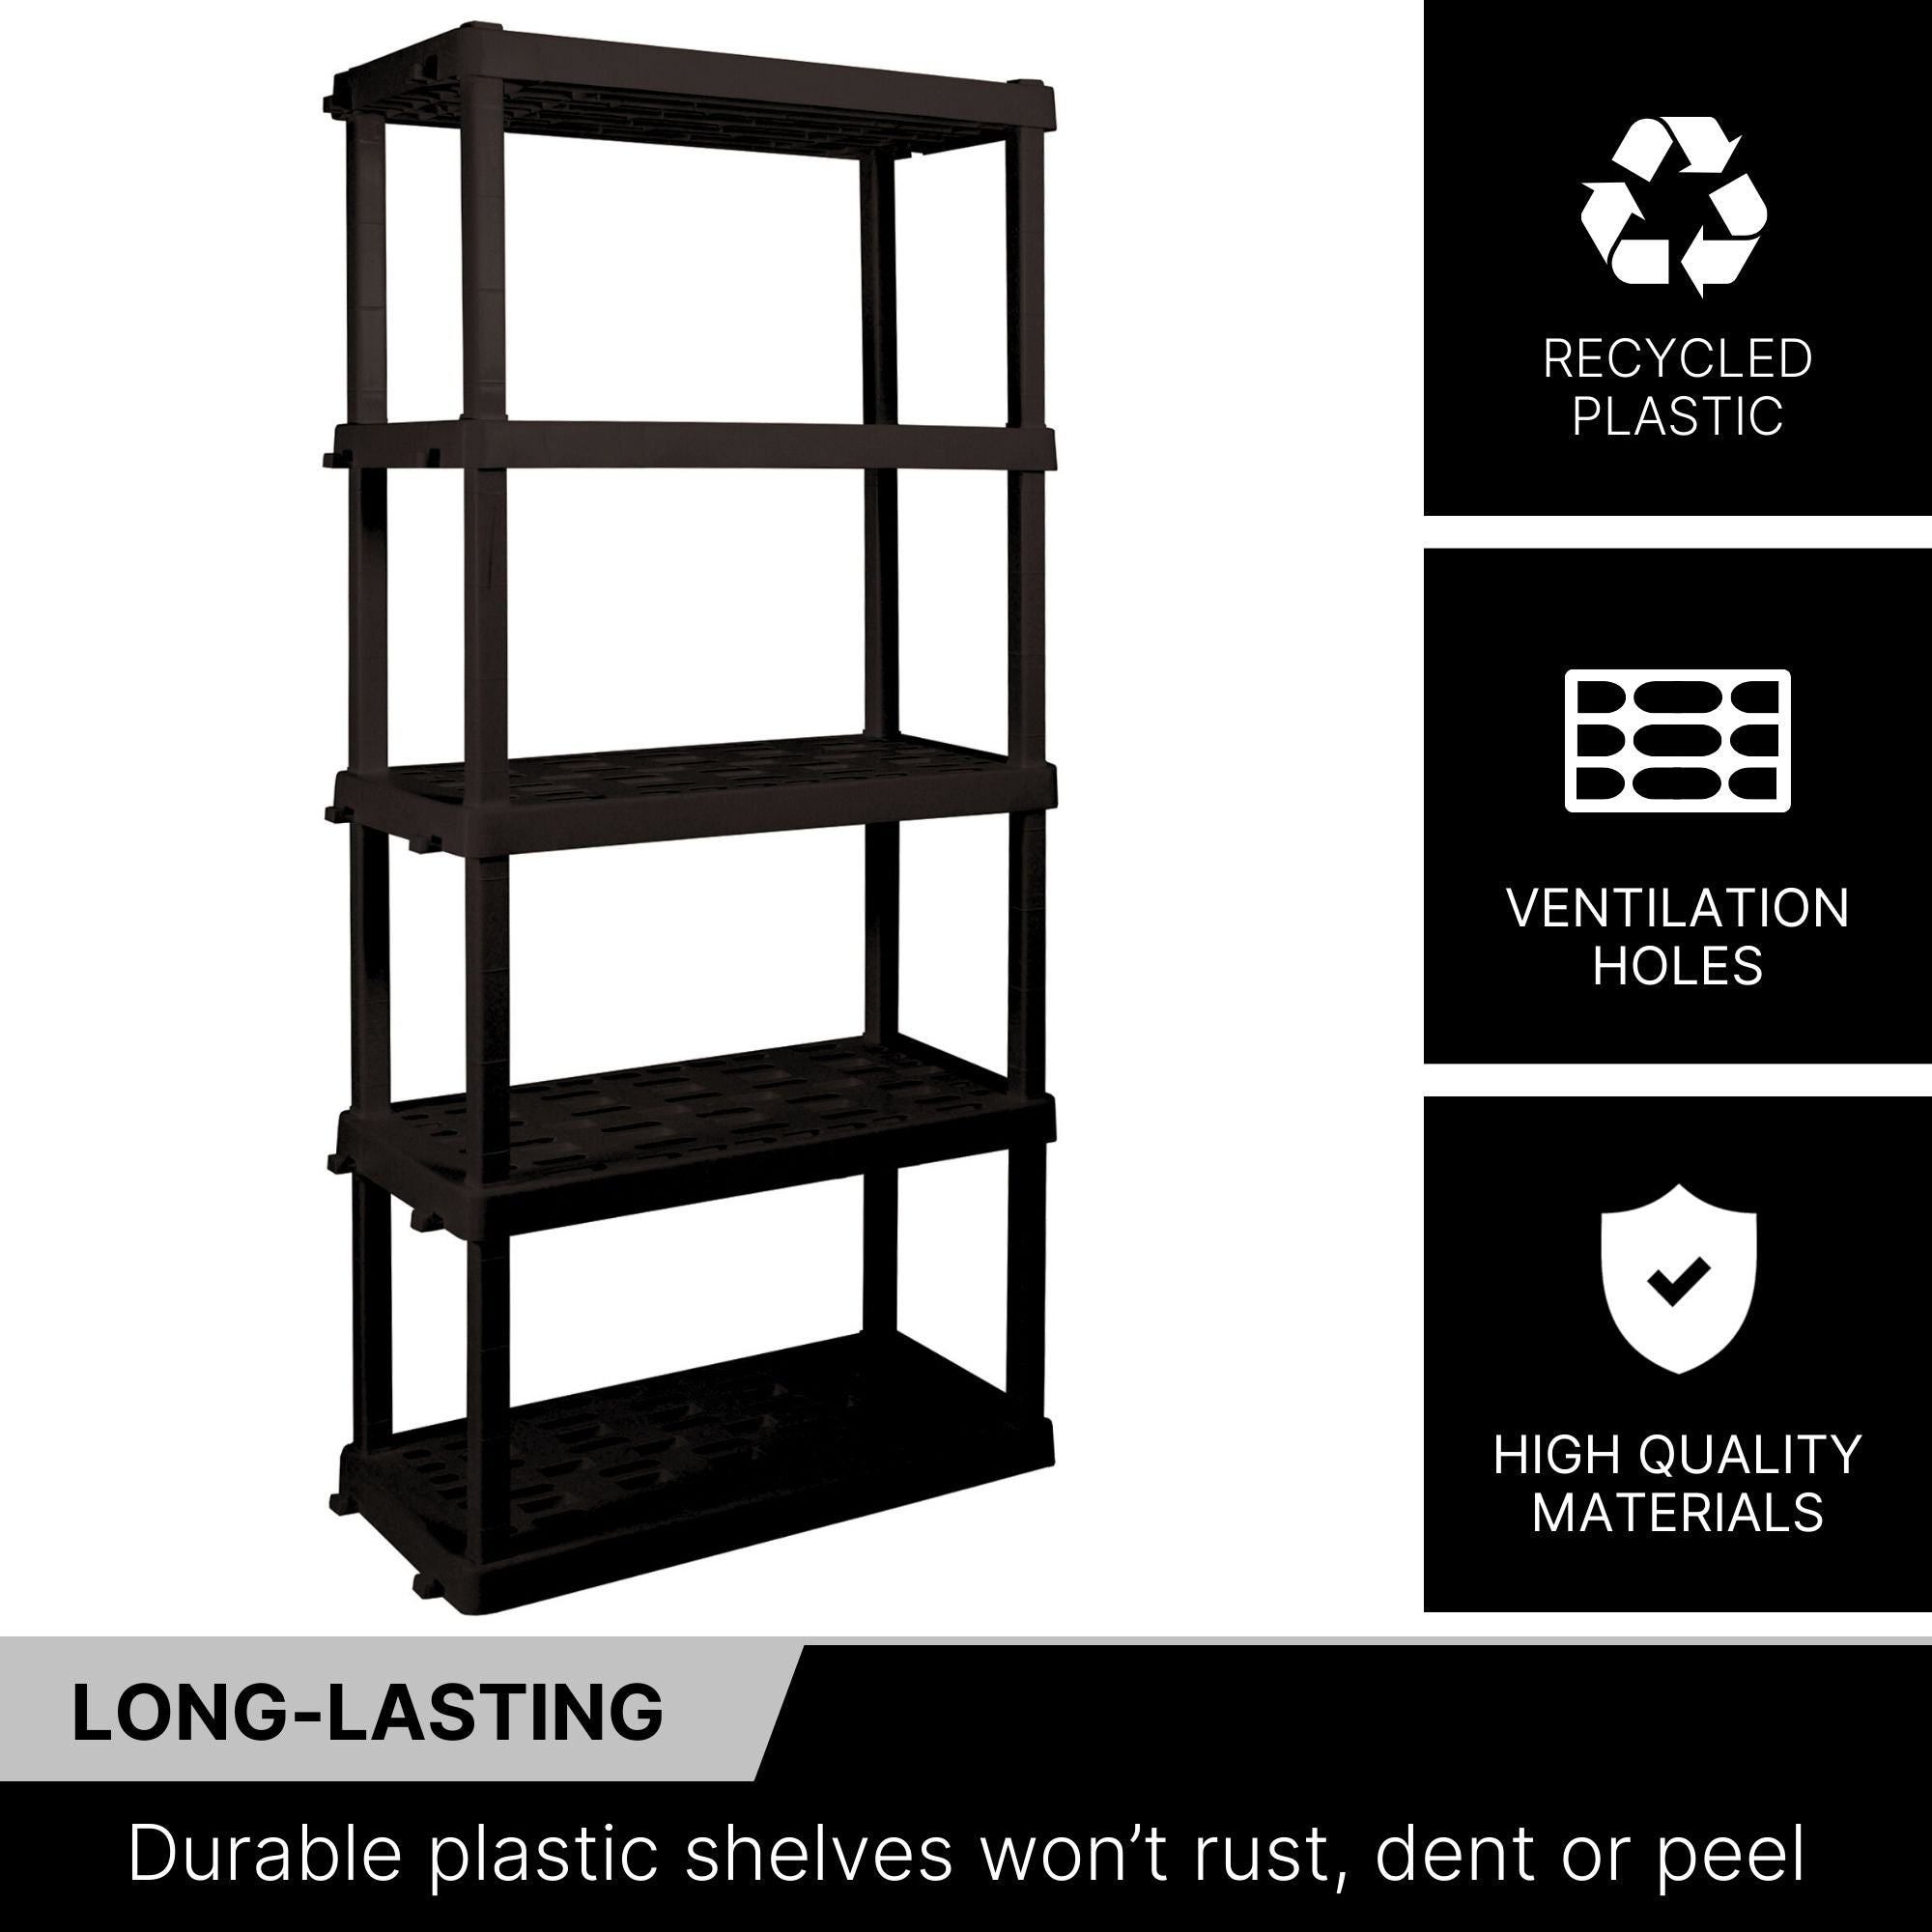 Oskar 5-tier shelf unit on a white background with text and icons to the right describing features: Recycled plastic; ventilation holes; high quality materials. Text below reads,"Long-lasting: Durable plastic shelves won’t rust, dent or peel"